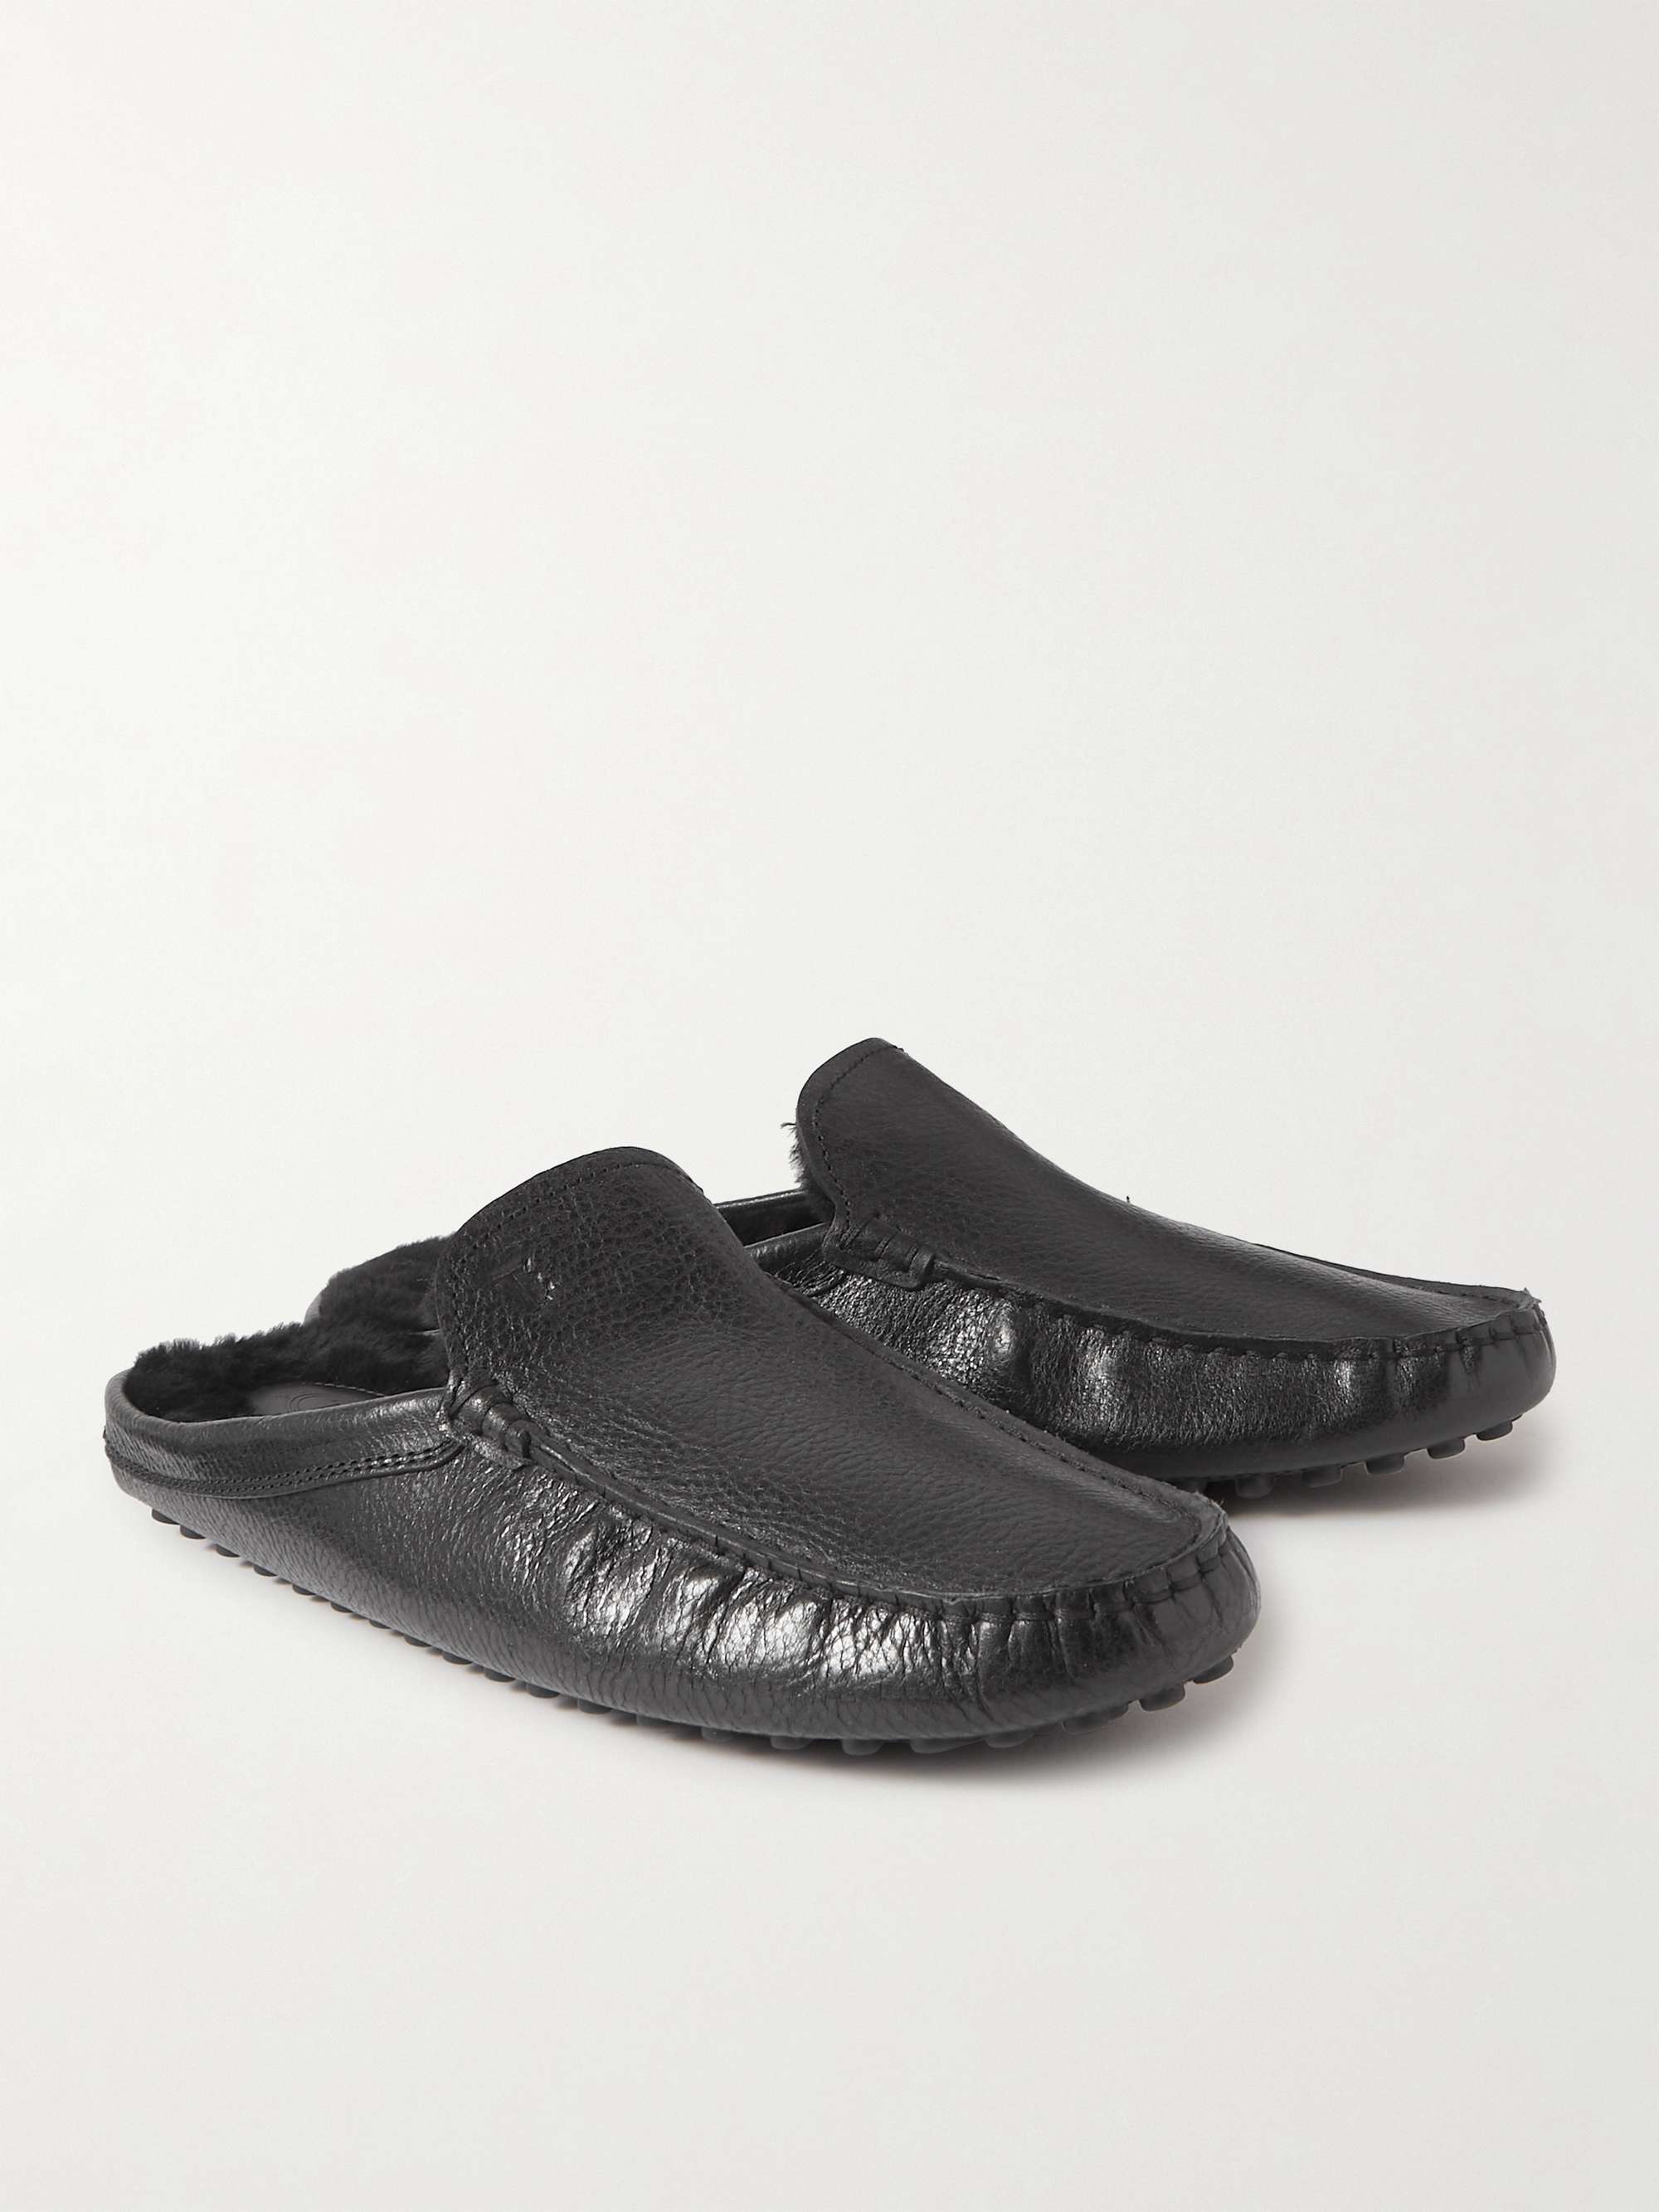 TOD'S Shearling-Lined Full-Grain Leather Slippers